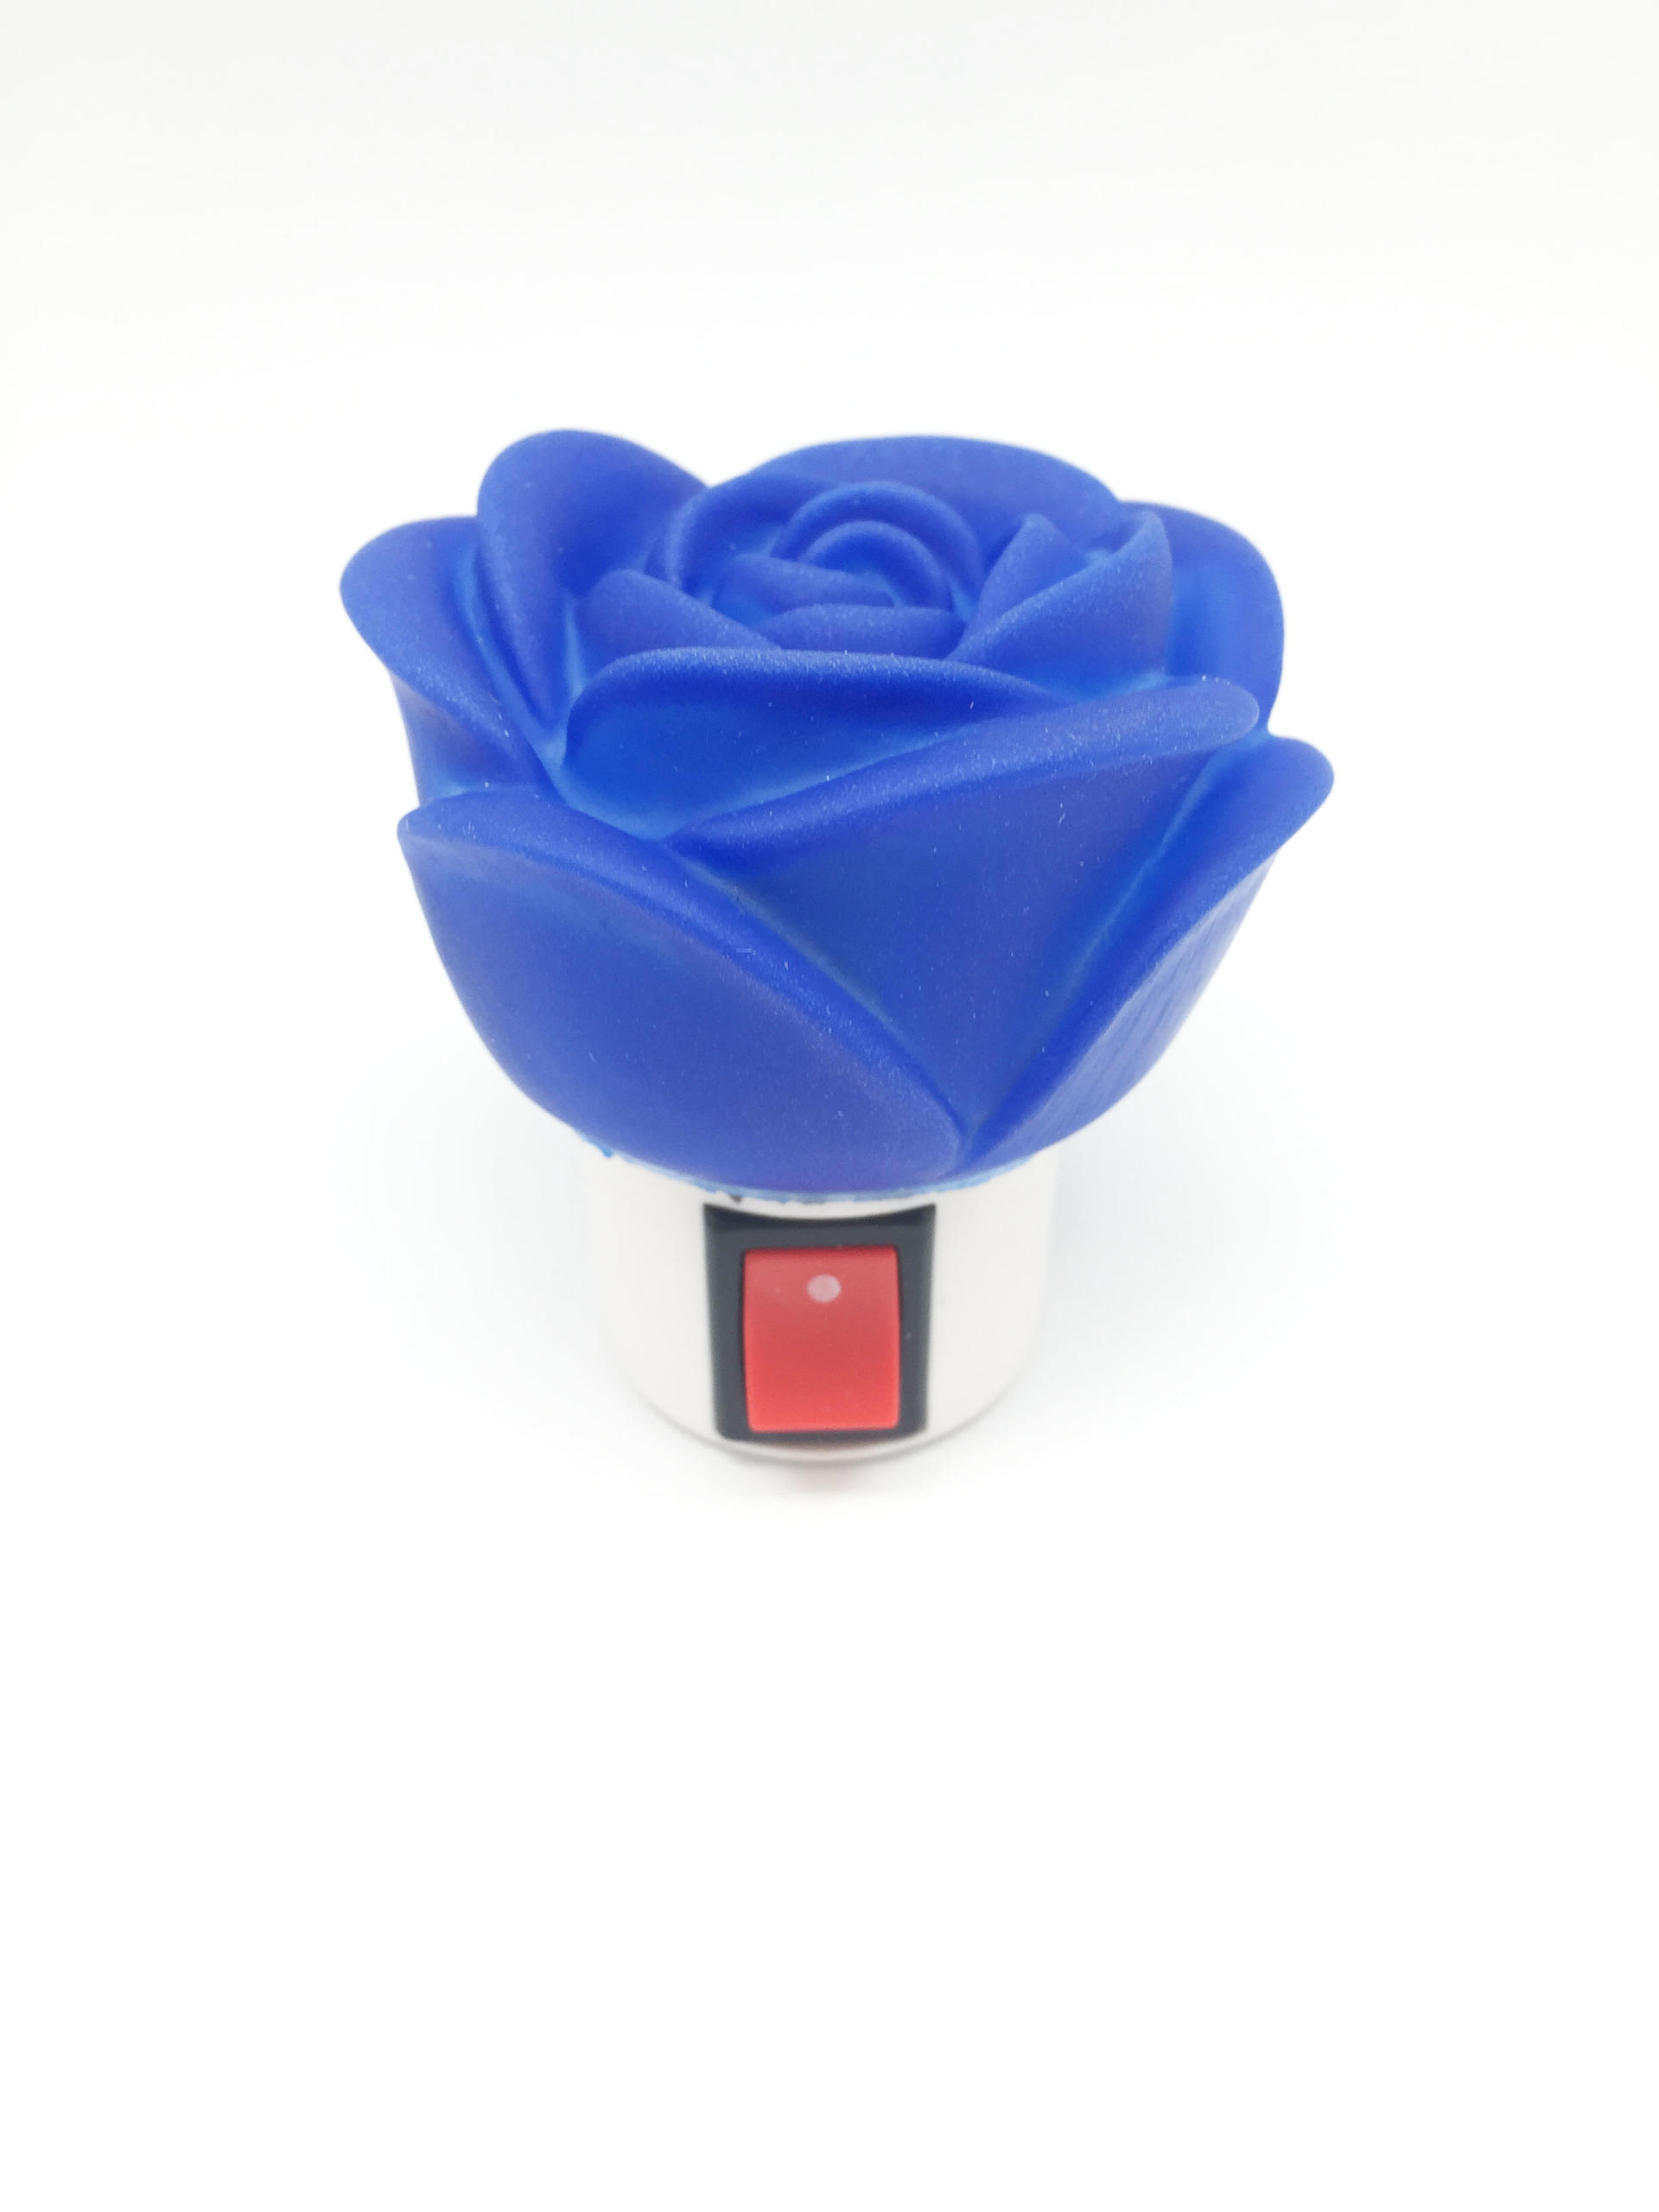 Rose shape LED mini switch plug in night light for kids bedroom with 0.6W and 110V or 220V